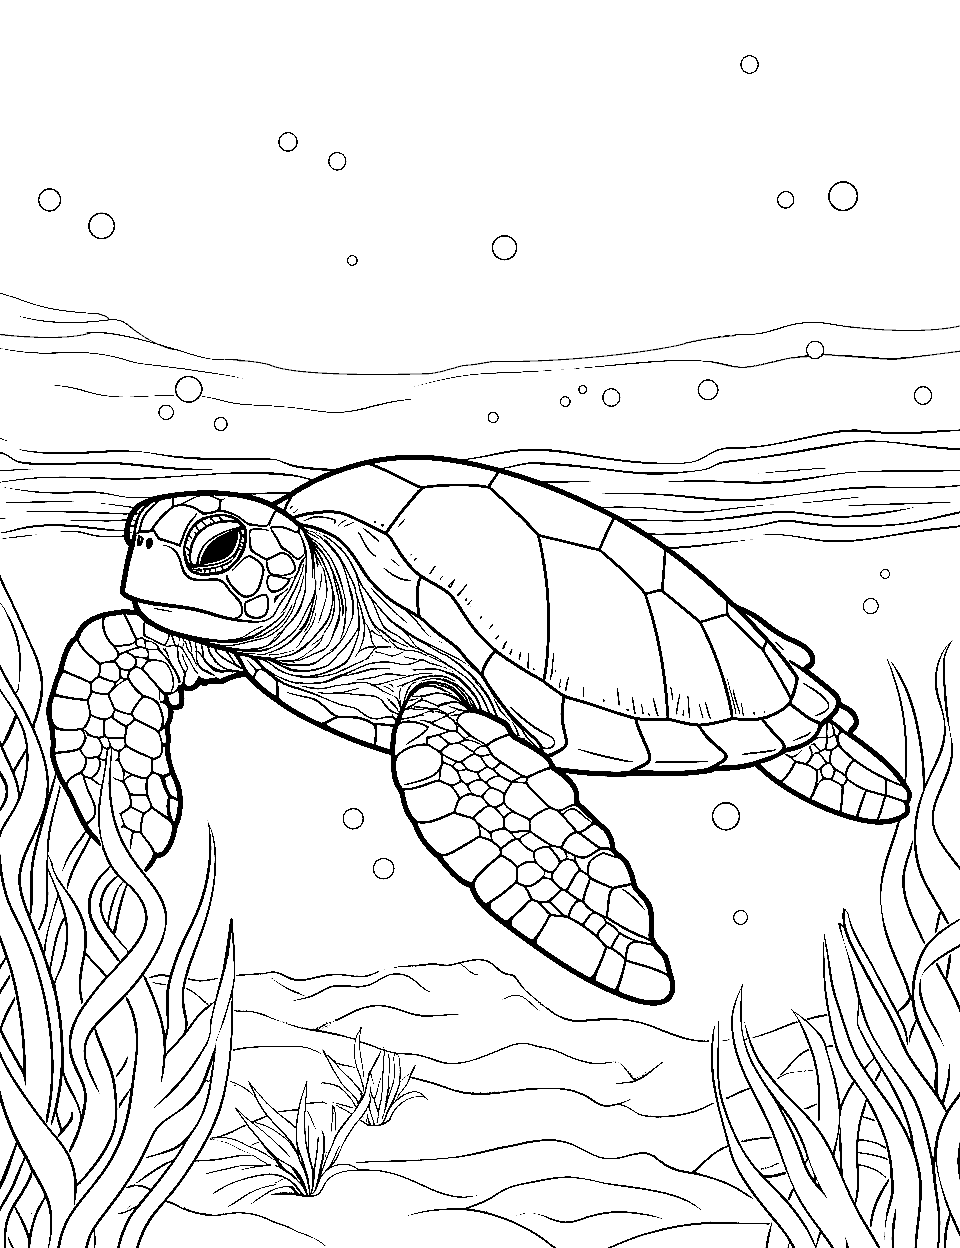 Ocean's Lone Traveler Turtle Coloring Page - A lone turtle traveling through the vast expanse of the ocean.